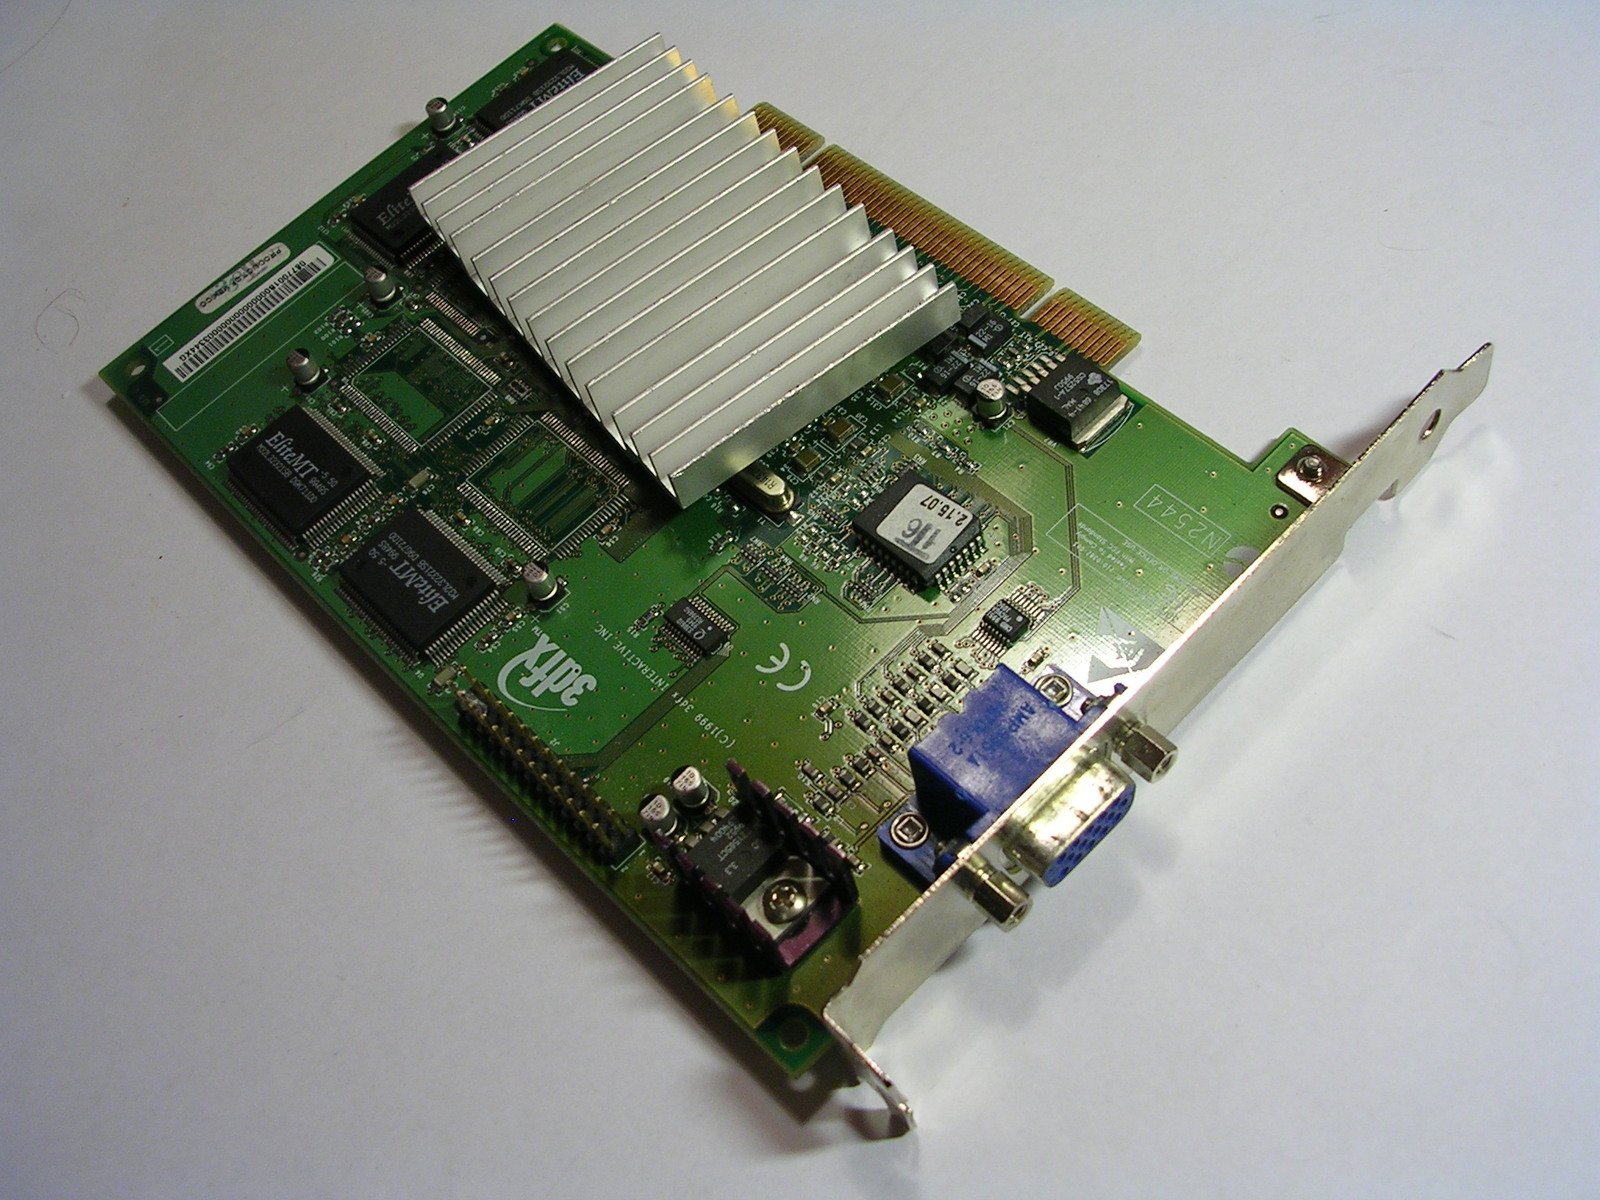 there is a small green computer card with a red and blue pin in it